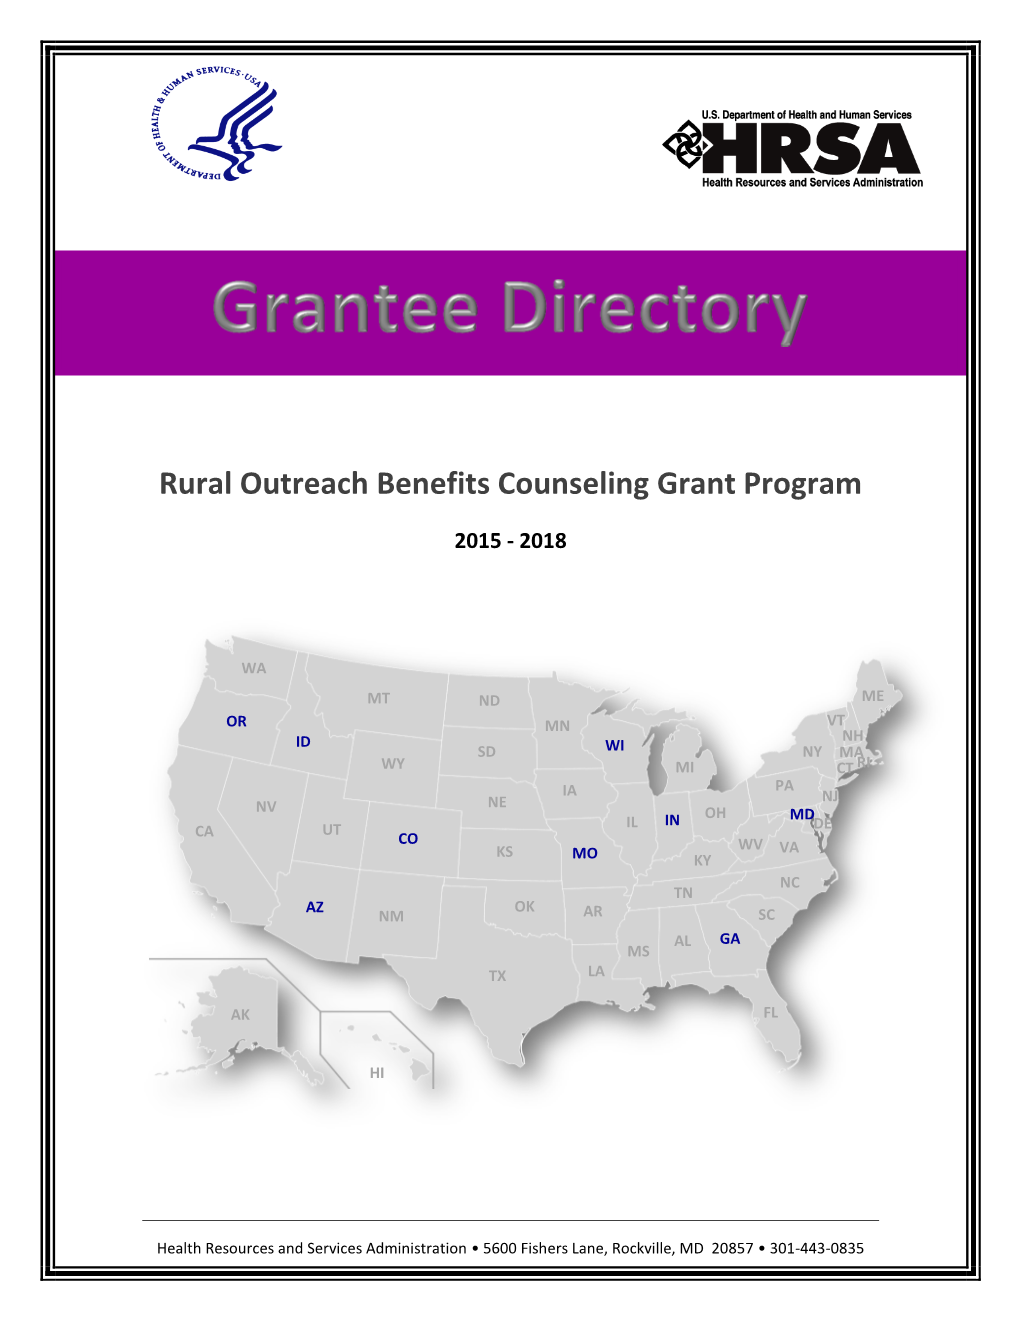 Rural Outreach Benefits Counseling Grant Program